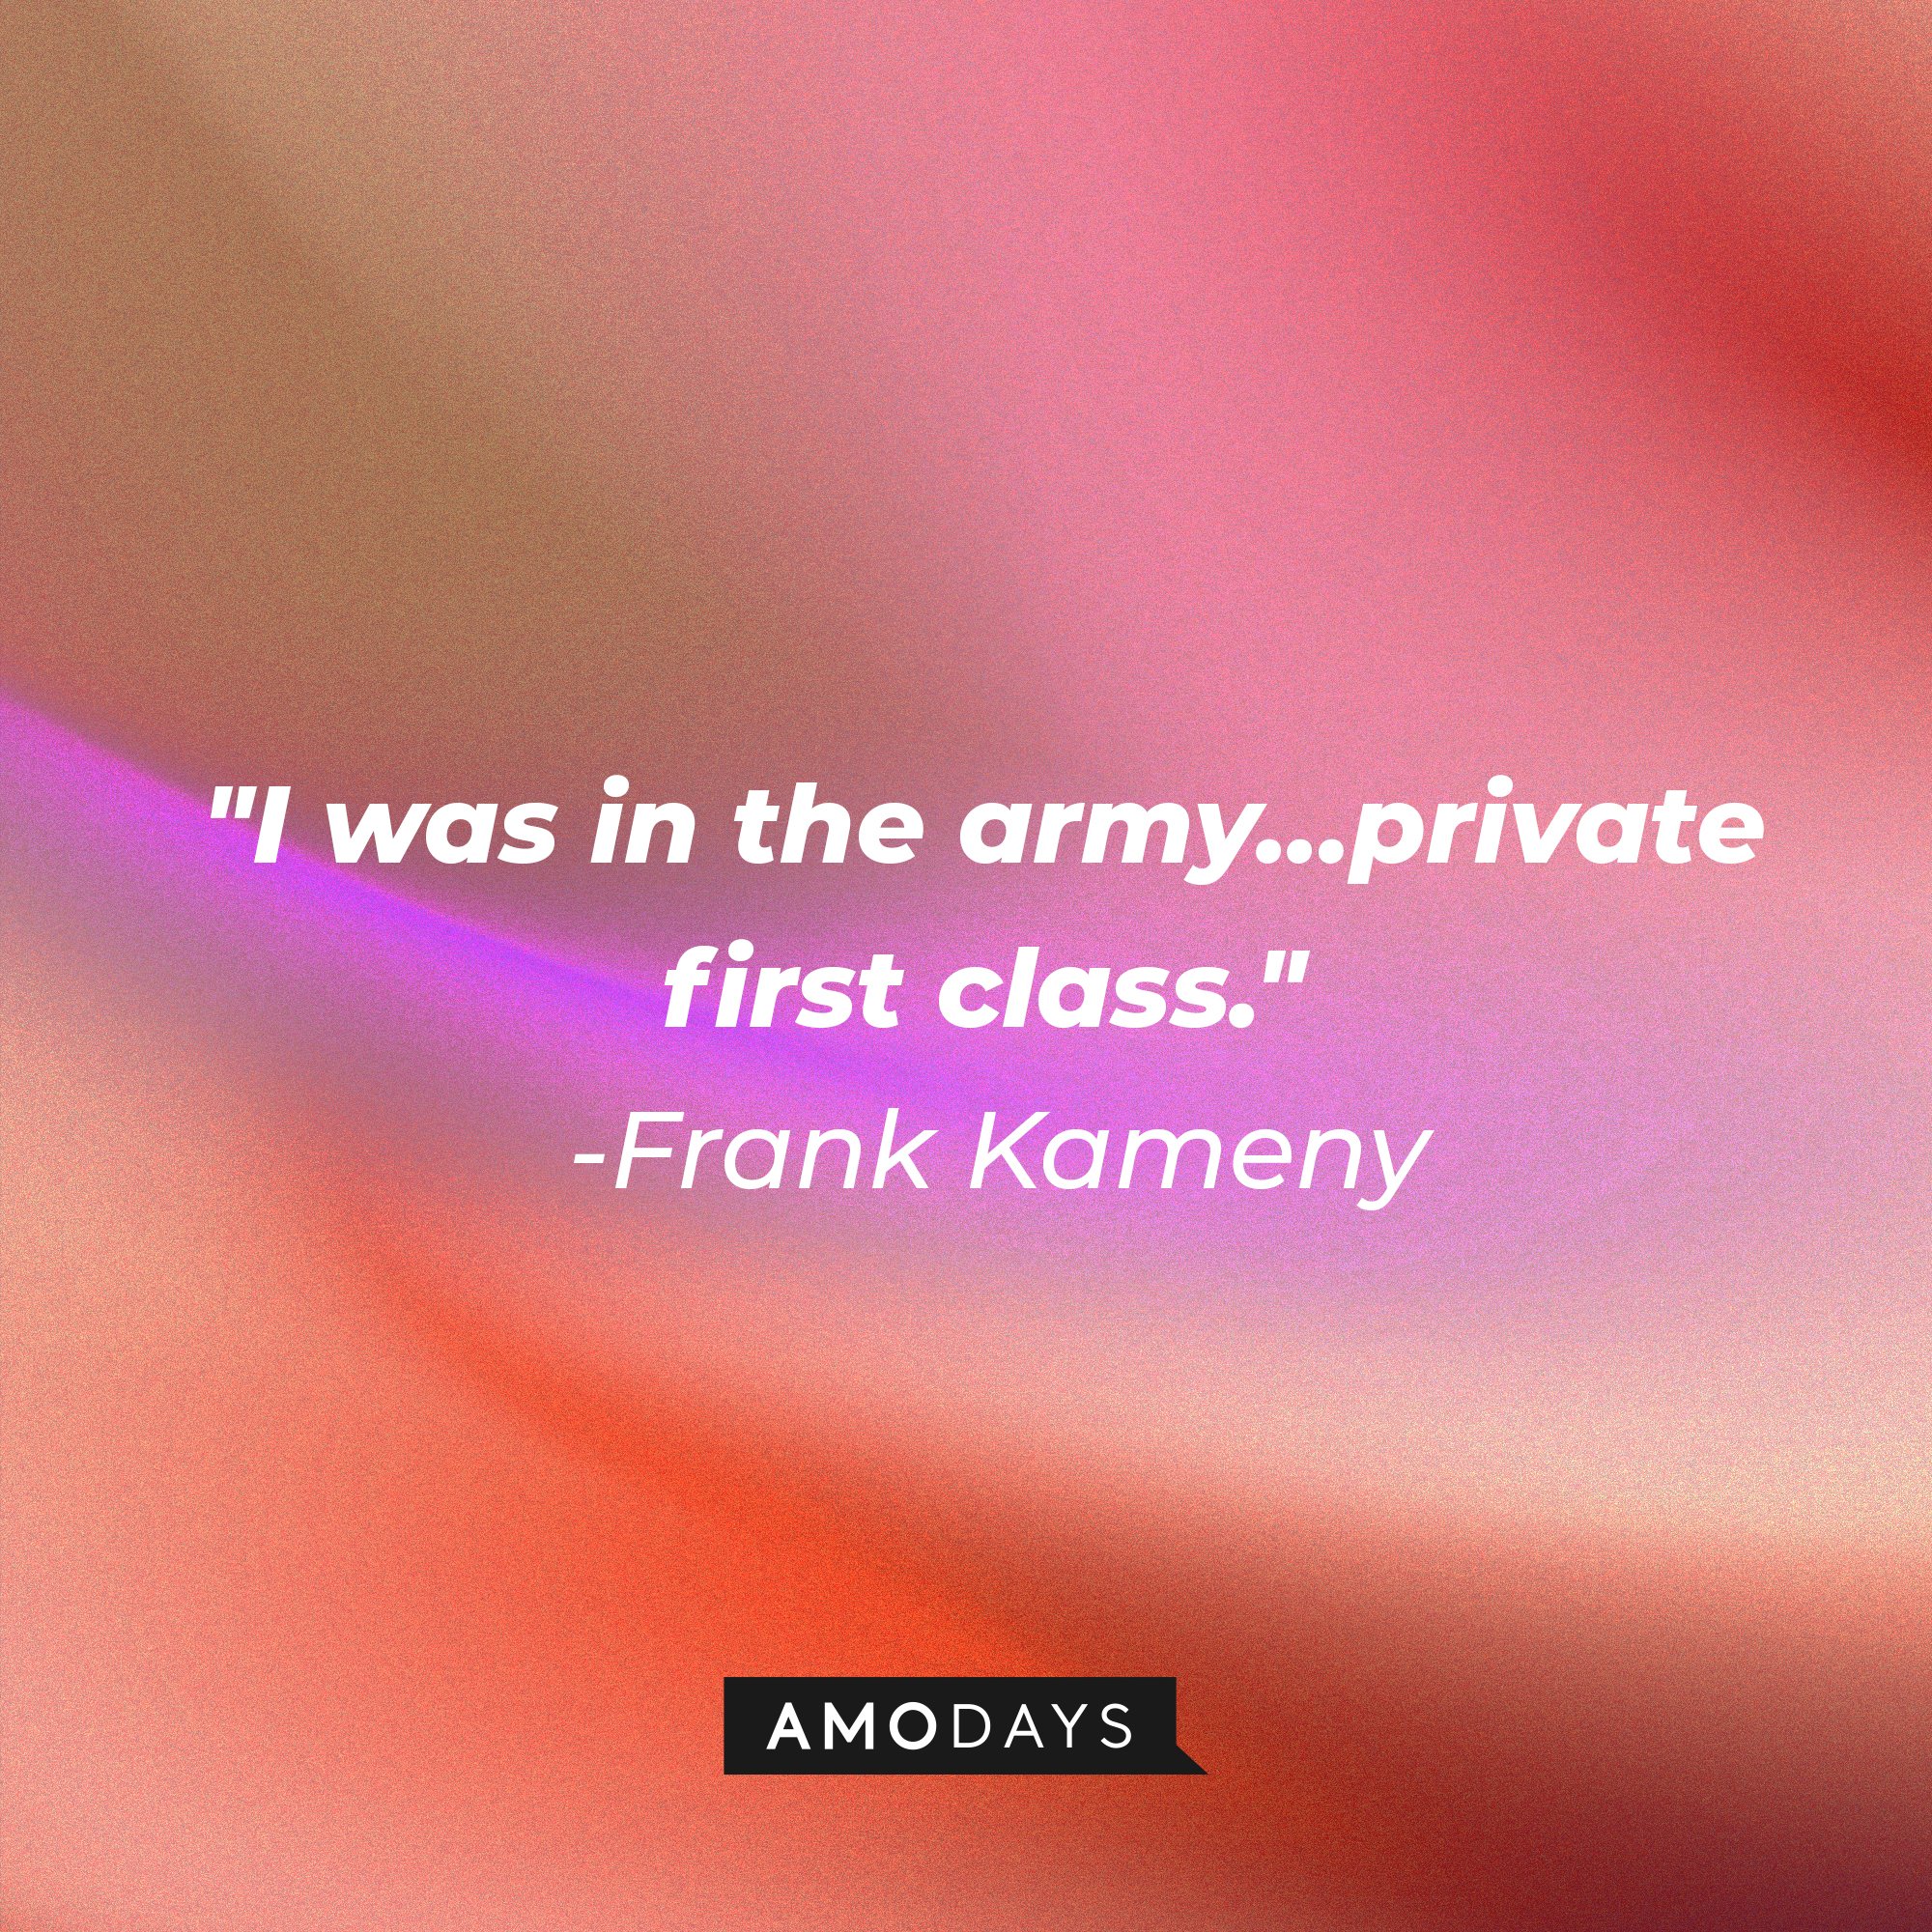 Frank Kameny's quote: "I was in the army…private first class." | Image: AmoDays